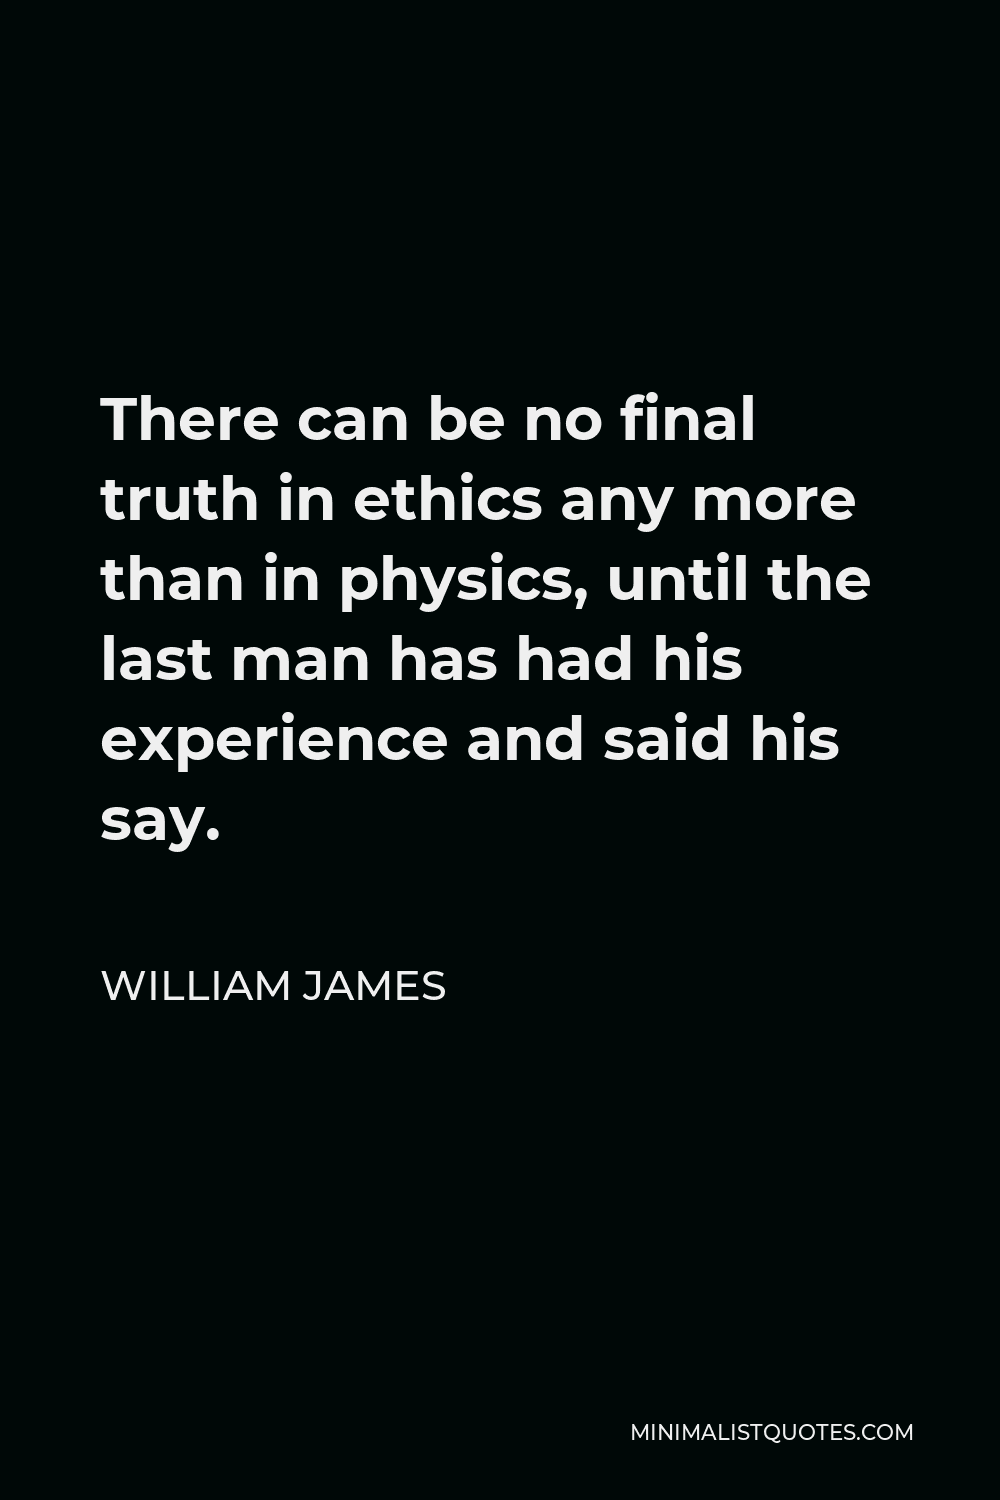 William James Quote - There can be no final truth in ethics any more than in physics, until the last man has had his experience and said his say.